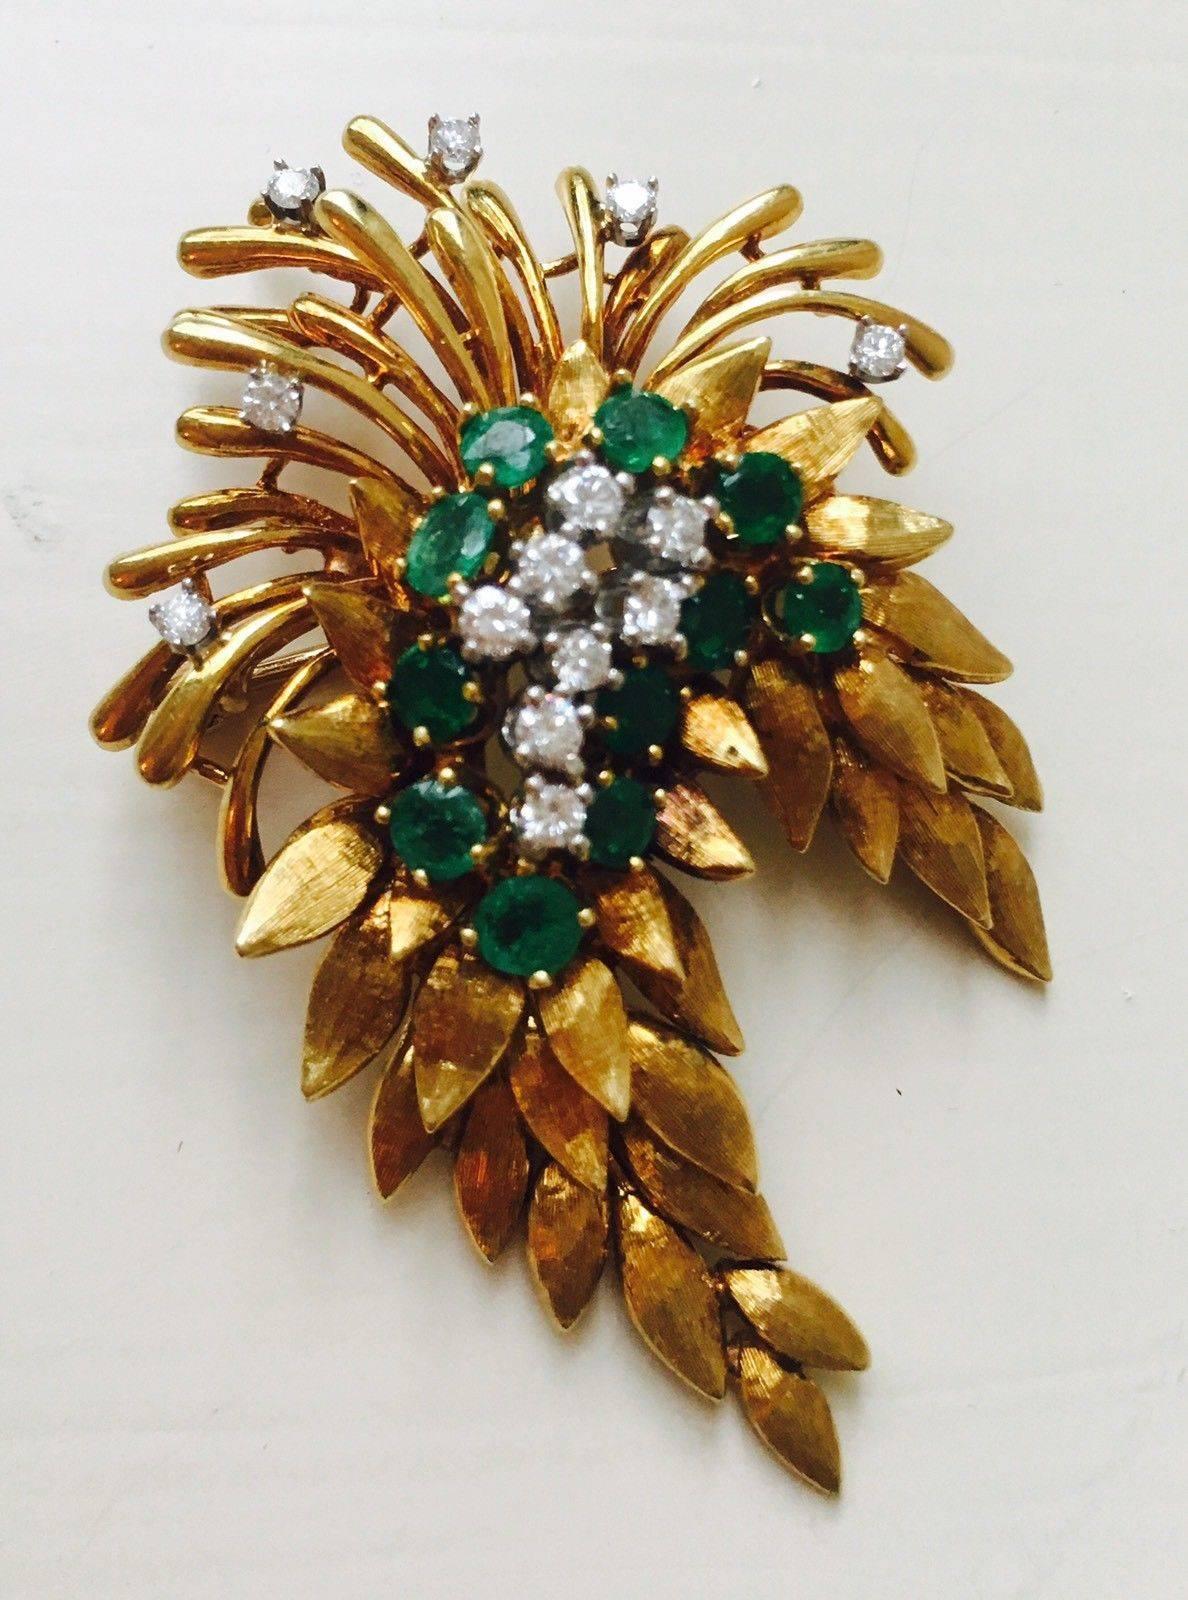 French Art Deco 1940s 18 Karat Gold 4.84 Carat Emerald Diamond Necklace Pendant In Excellent Condition For Sale In Shaker Heights, OH